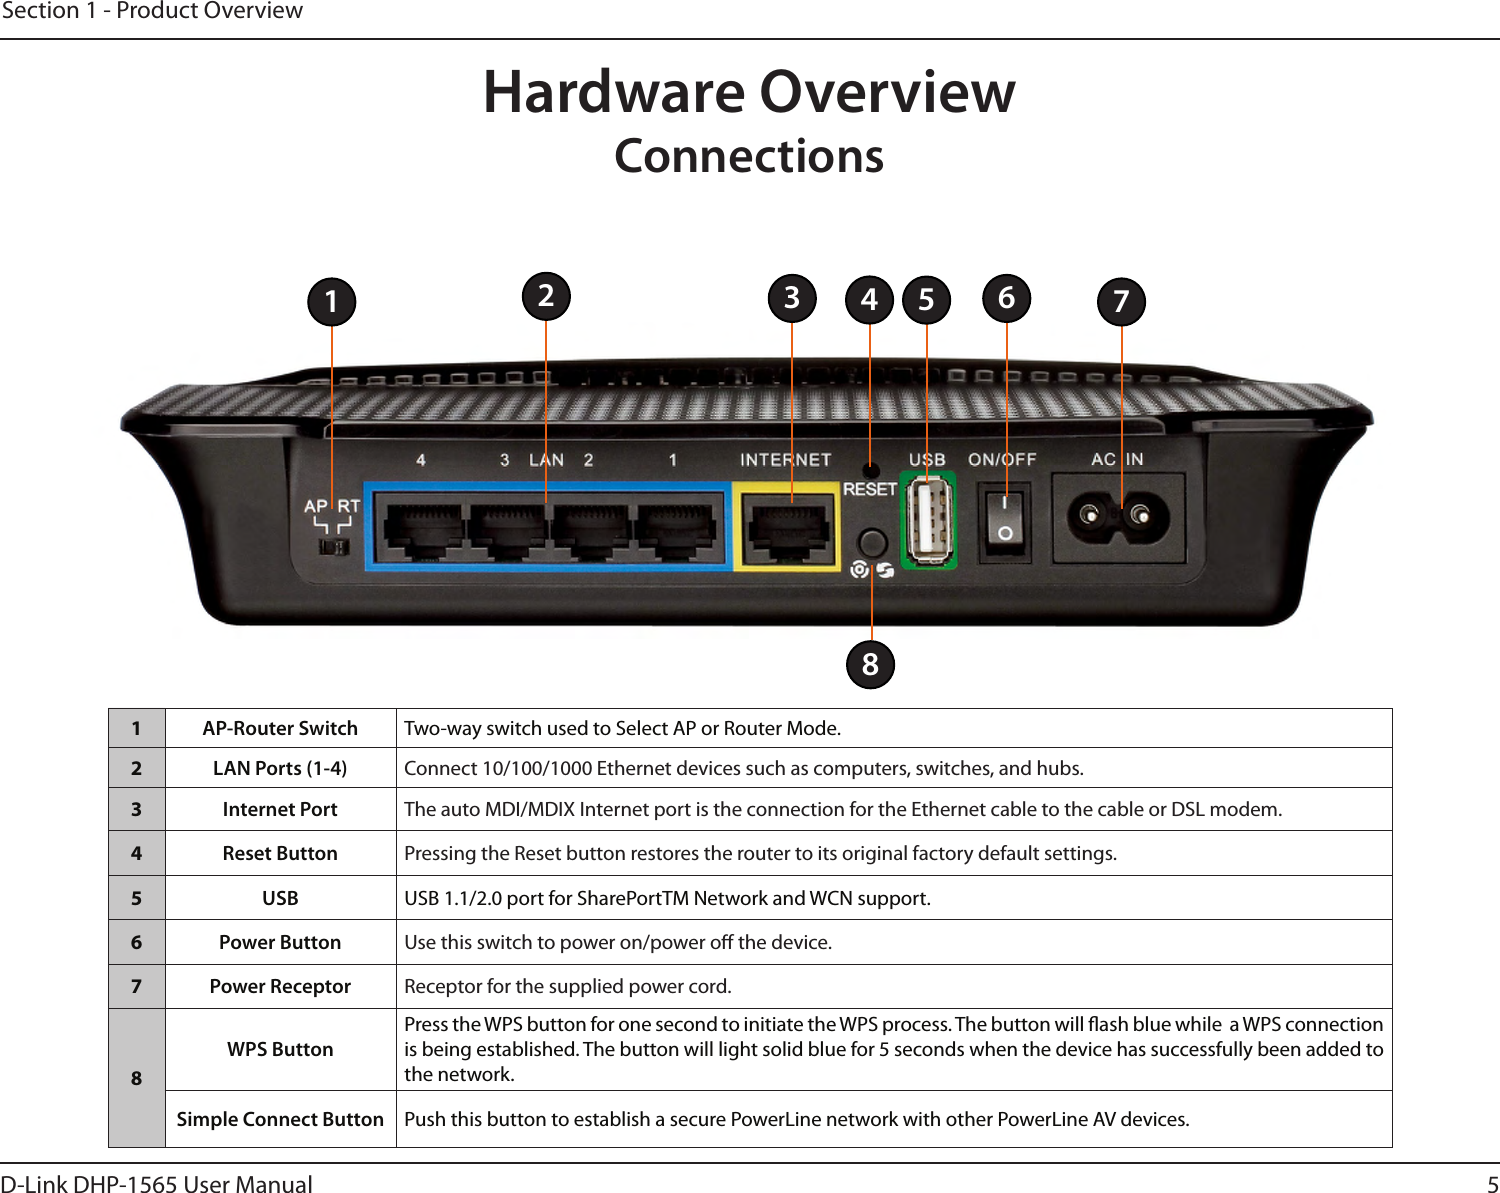 5D-Link DHP-1565 User ManualSection 1 - Product OverviewHardware OverviewConnections1AP-Router Switch Two-way switch used to Select AP or Router Mode.2LAN Ports (1-4) Connect 10/100/1000 Ethernet devices such as computers, switches, and hubs.3Internet Port The auto MDI/MDIX Internet port is the connection for the Ethernet cable to the cable or DSL modem.4Reset Button Pressing the Reset button restores the router to its original factory default settings.5USB USB 1.1/2.0 port for SharePortTM Network and WCN support.6Power Button Use this switch to power on/power o the device.7Power Receptor Receptor for the supplied power cord.8WPS ButtonPress the WPS button for one second to initiate the WPS process. The button will ash blue while  a WPS connection is being established. The button will light solid blue for 5 seconds when the device has successfully been added to the network.Simple Connect Button Push this button to establish a secure PowerLine network with other PowerLine AV devices.234561 78